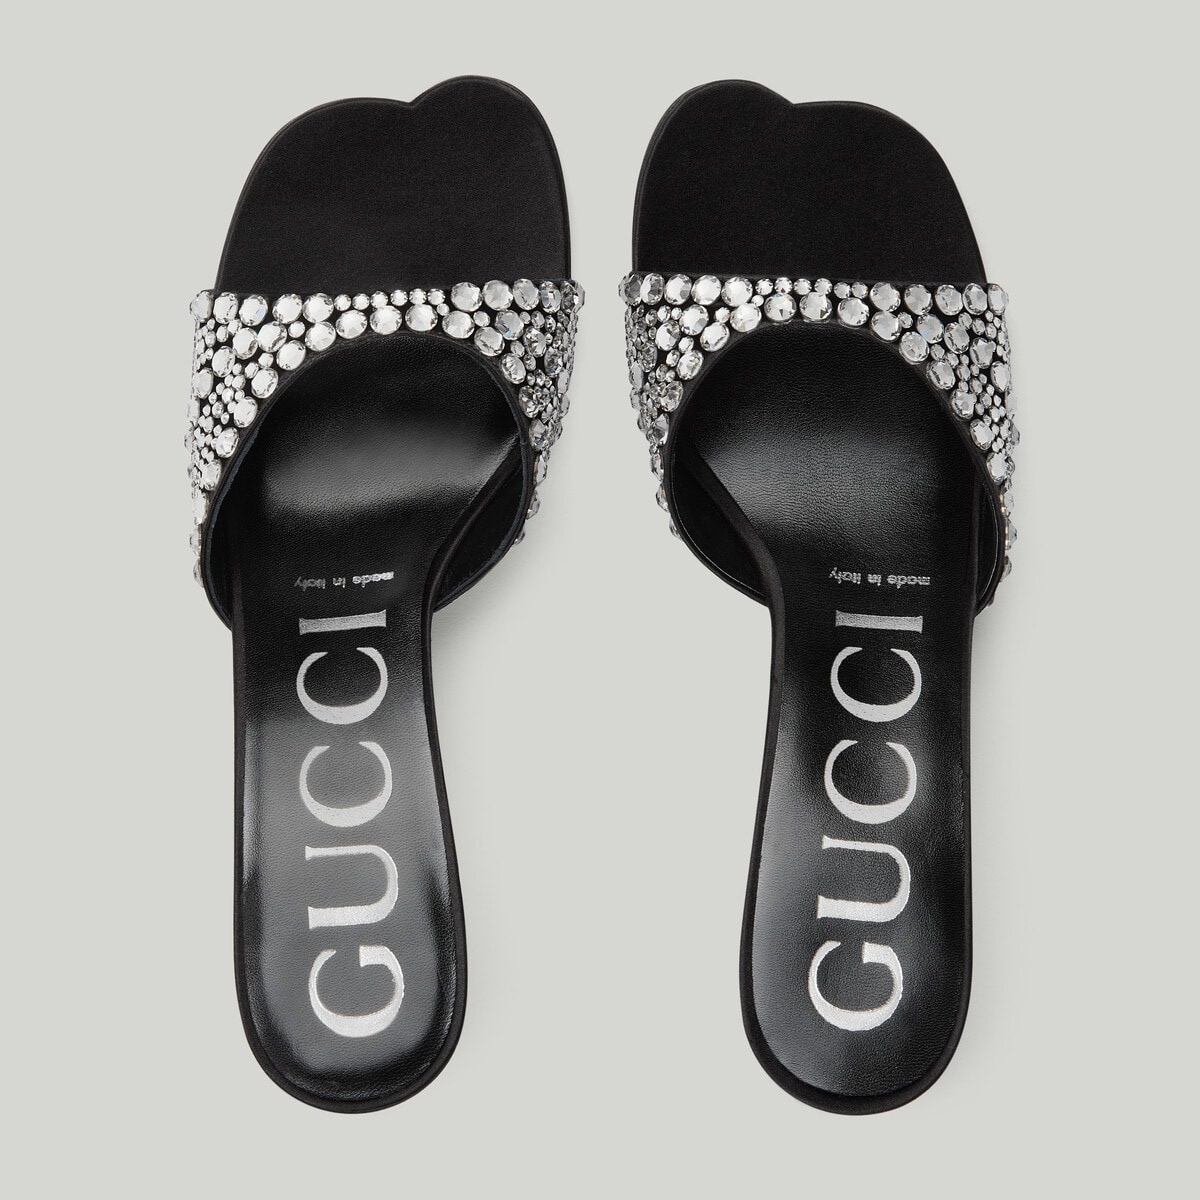 Women's slide sandal with crystals - 5